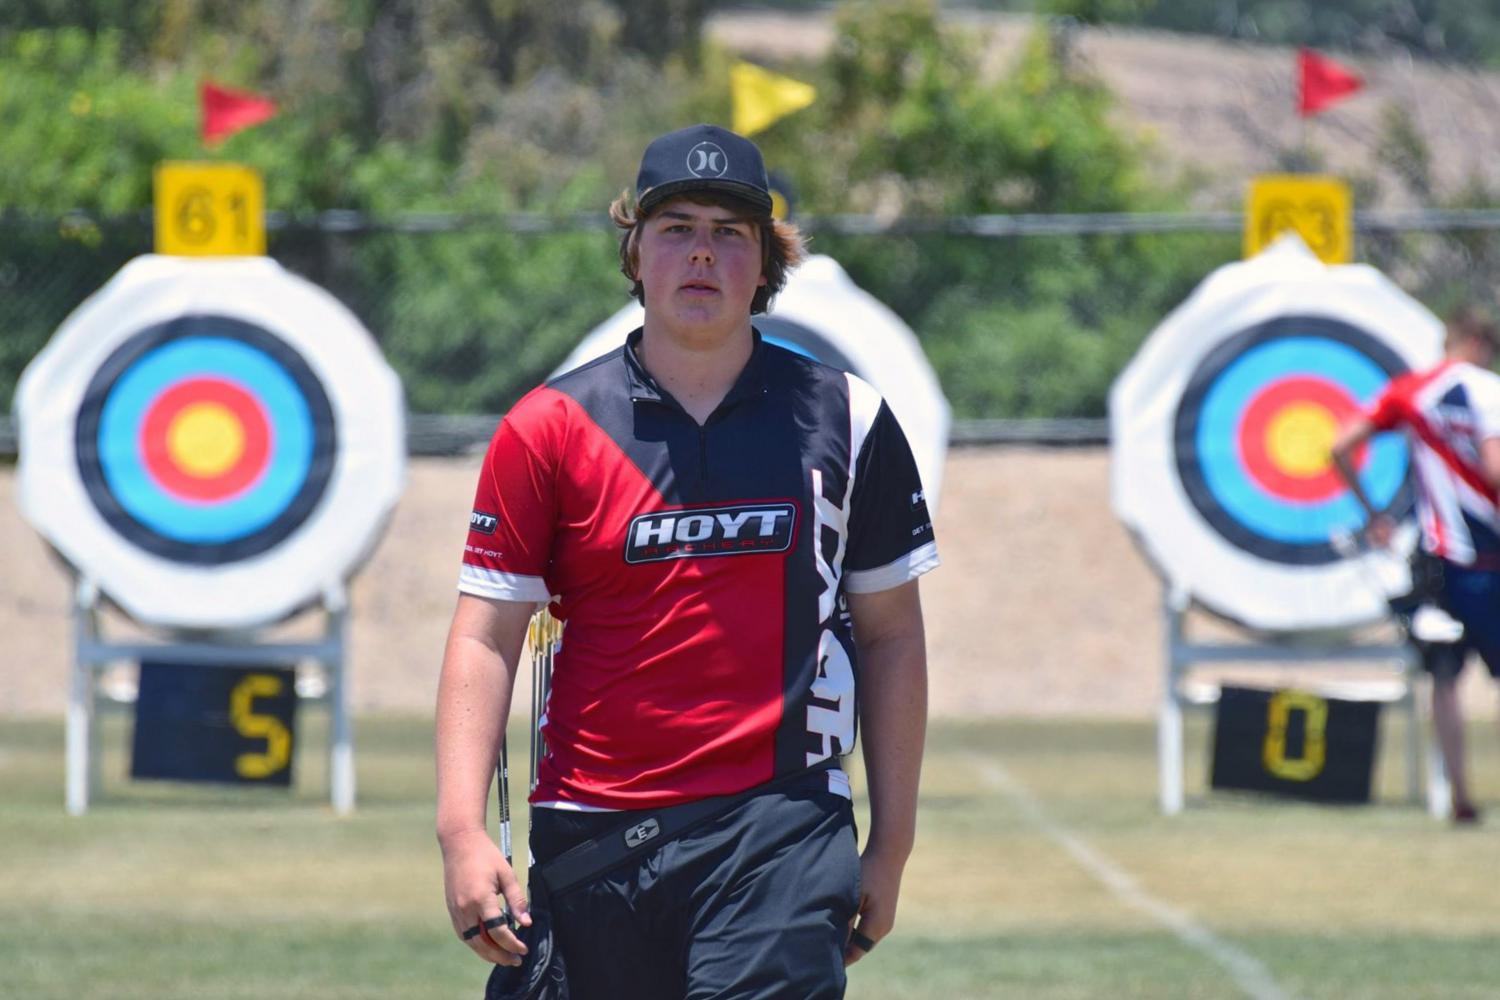 Olympic+hopeful+Jack+Williams+steadies+his+hands+for+a+precise+shot+at+the+archery+range%2C+hoping+to+advance+his+archery+career.+